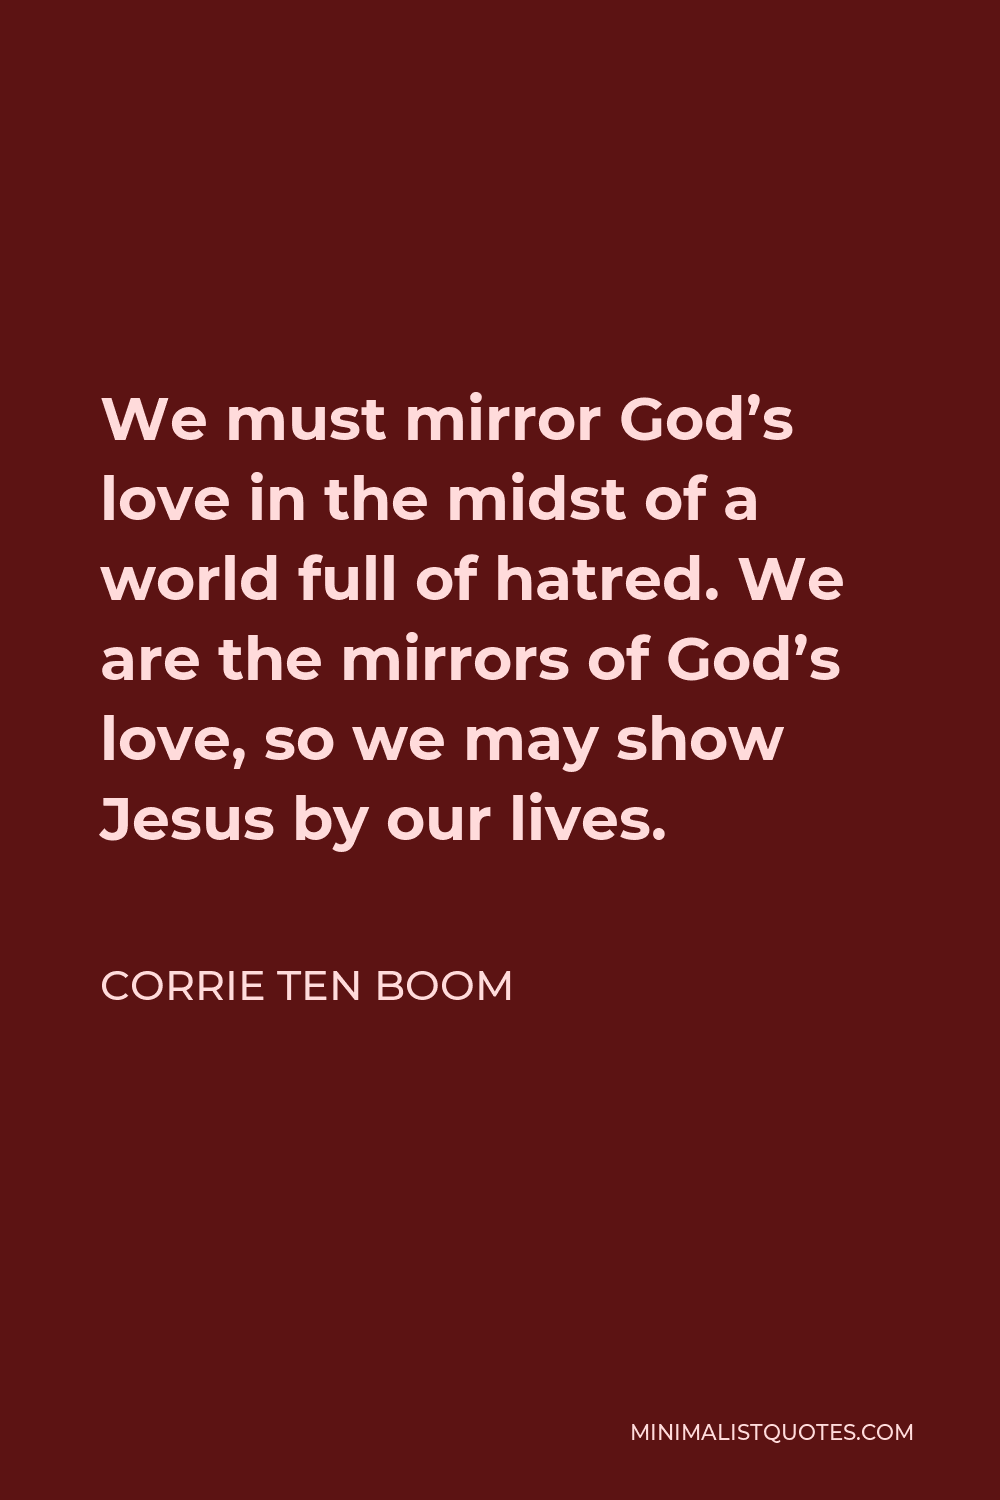 Pin by Bronwyn Myer on Faith  Corrie ten boom quotes, Corrie ten